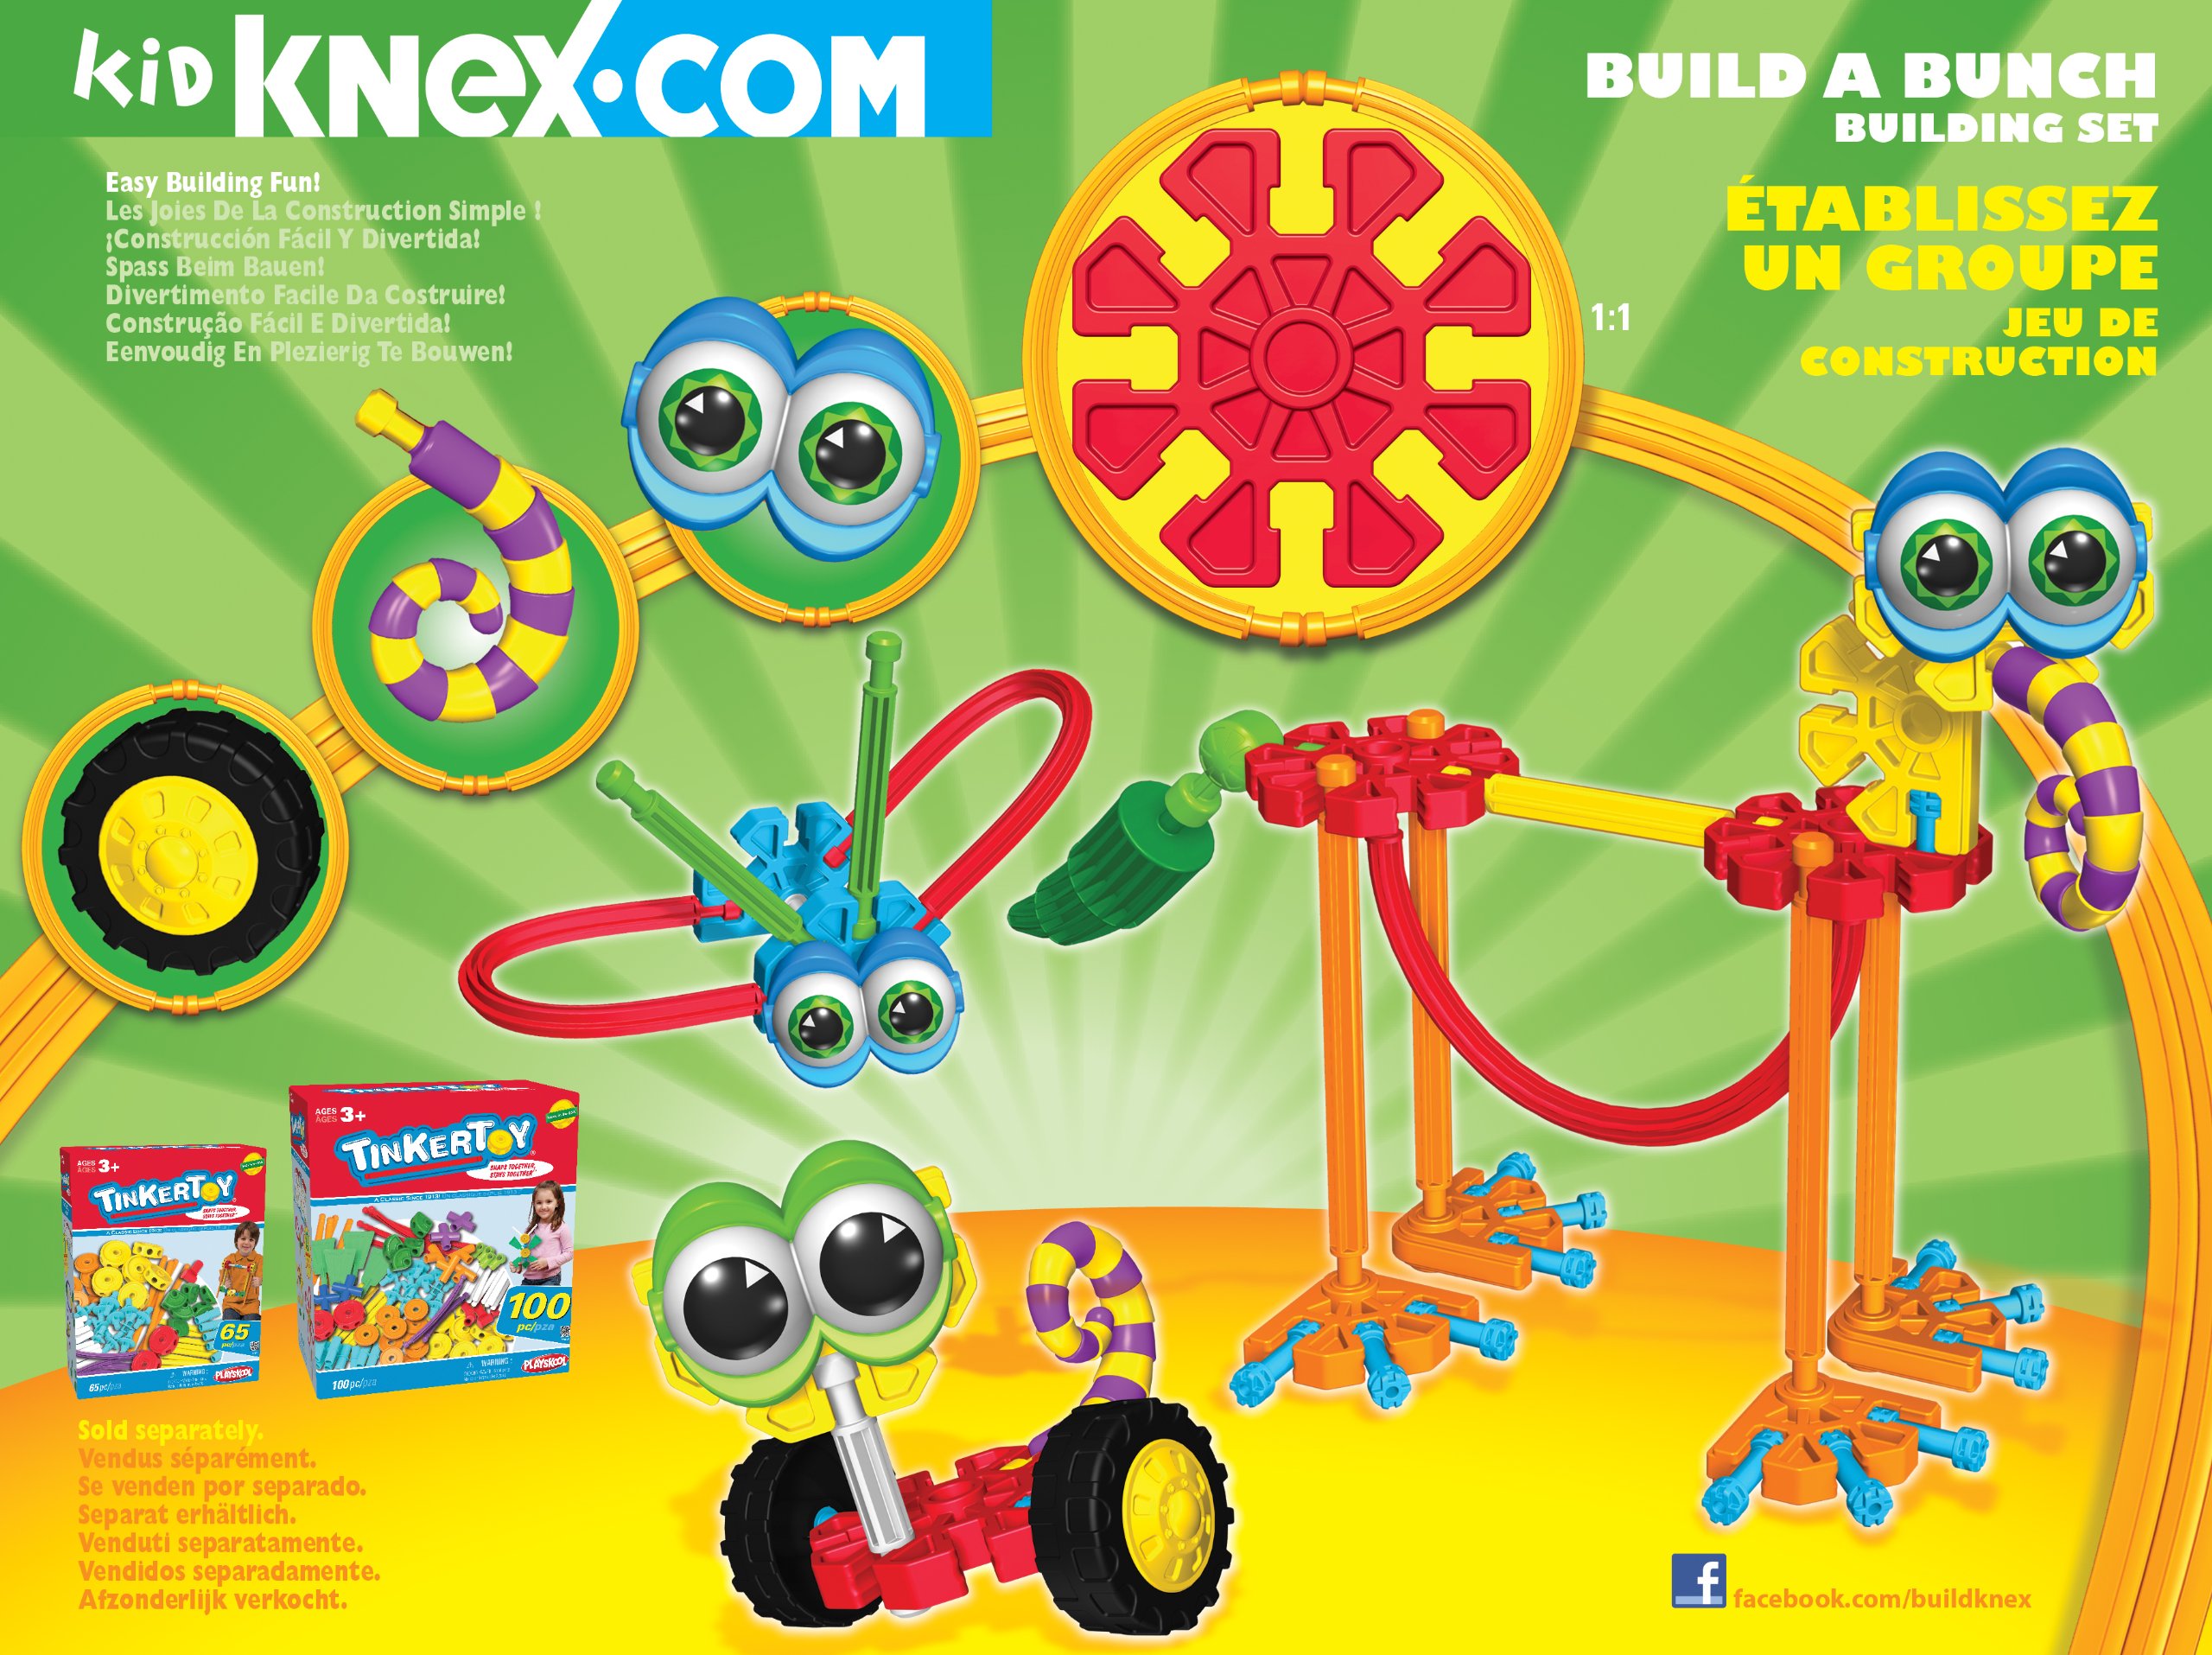 KID K’NEX – Build A Bunch Set – 66 Pieces – For Ages 3+ Construction  Educational Toy (Amazon Exclusive), packaging may vary